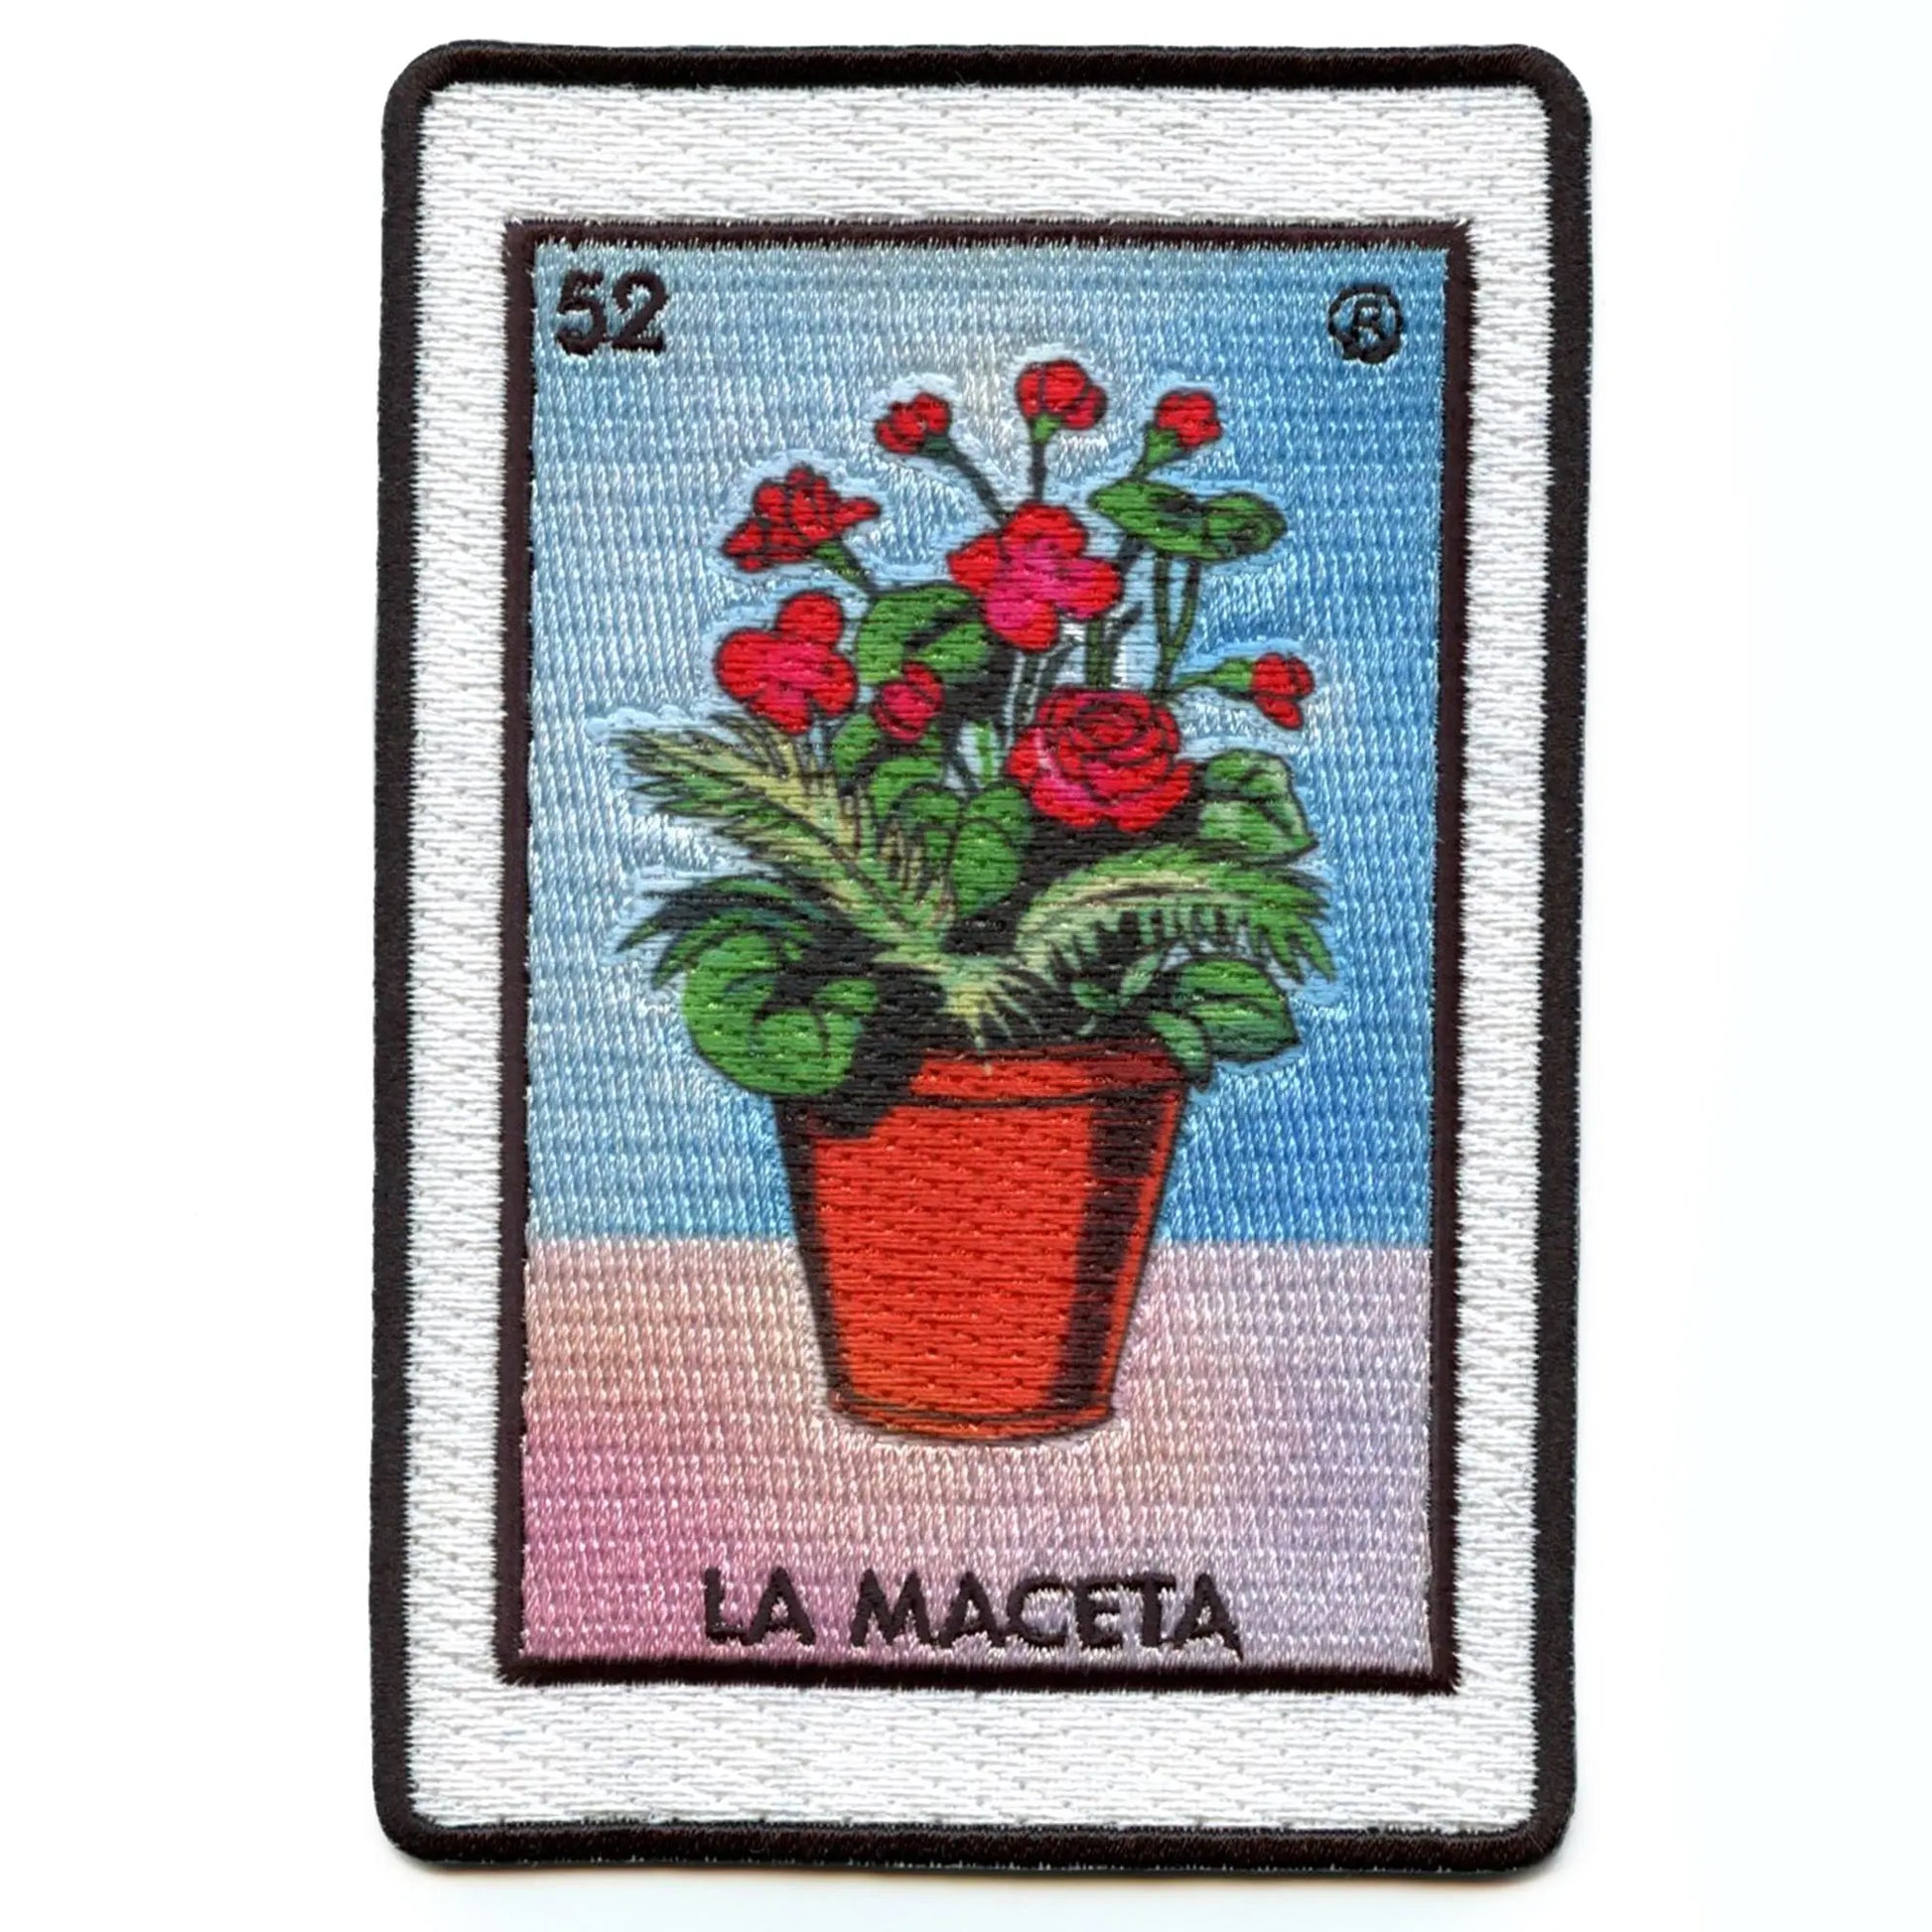 La Maceta 52 Patch Mexican Loteria Card Sublimated Embroidery Iron On